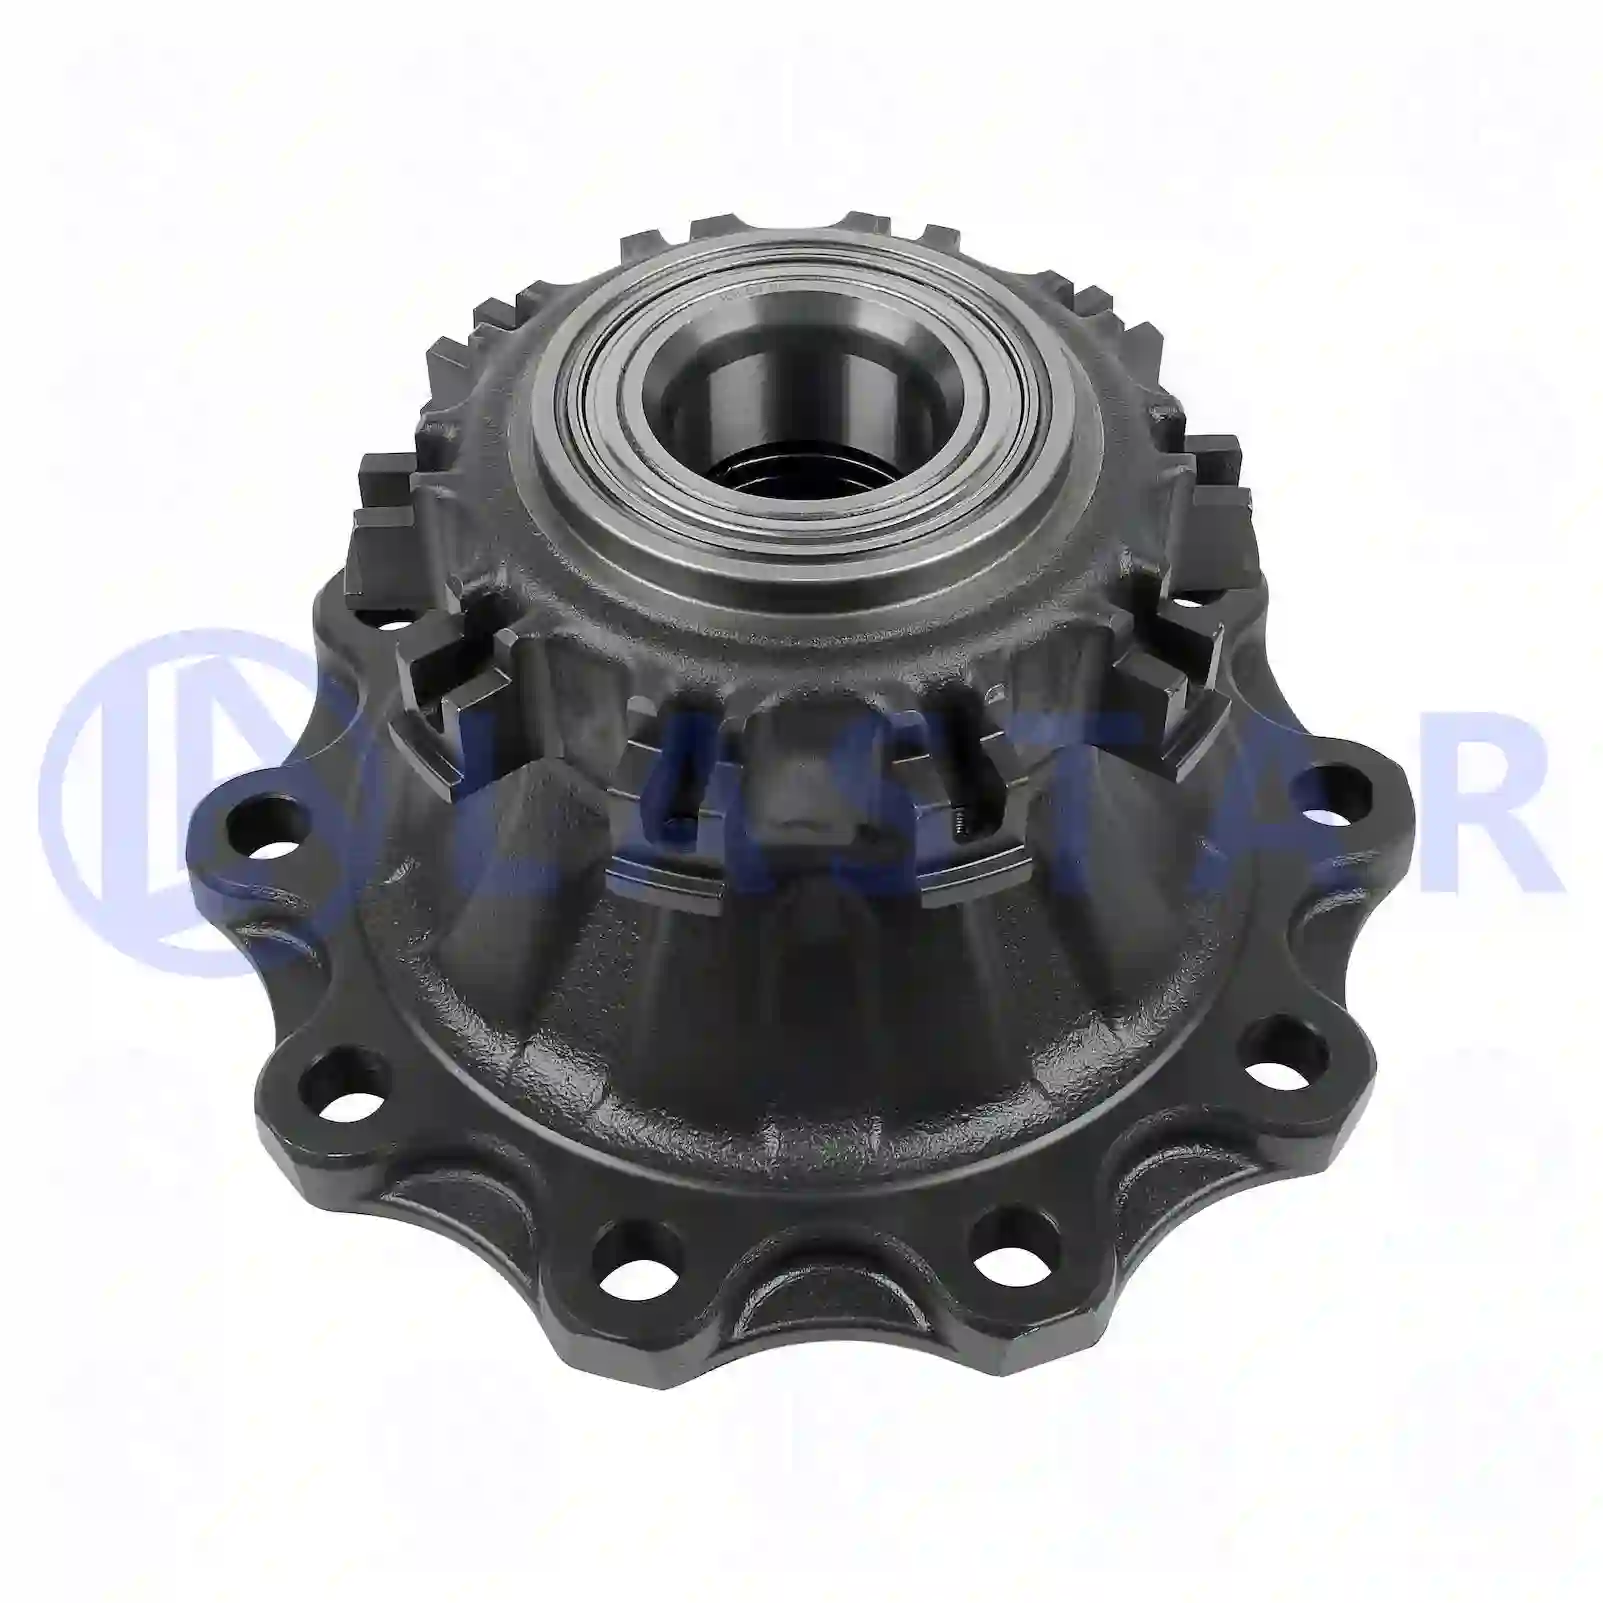 Wheel hub, without bearings, 77726488, 1691621S, 1699327S, 1818004S, , , ||  77726488 Lastar Spare Part | Truck Spare Parts, Auotomotive Spare Parts Wheel hub, without bearings, 77726488, 1691621S, 1699327S, 1818004S, , , ||  77726488 Lastar Spare Part | Truck Spare Parts, Auotomotive Spare Parts